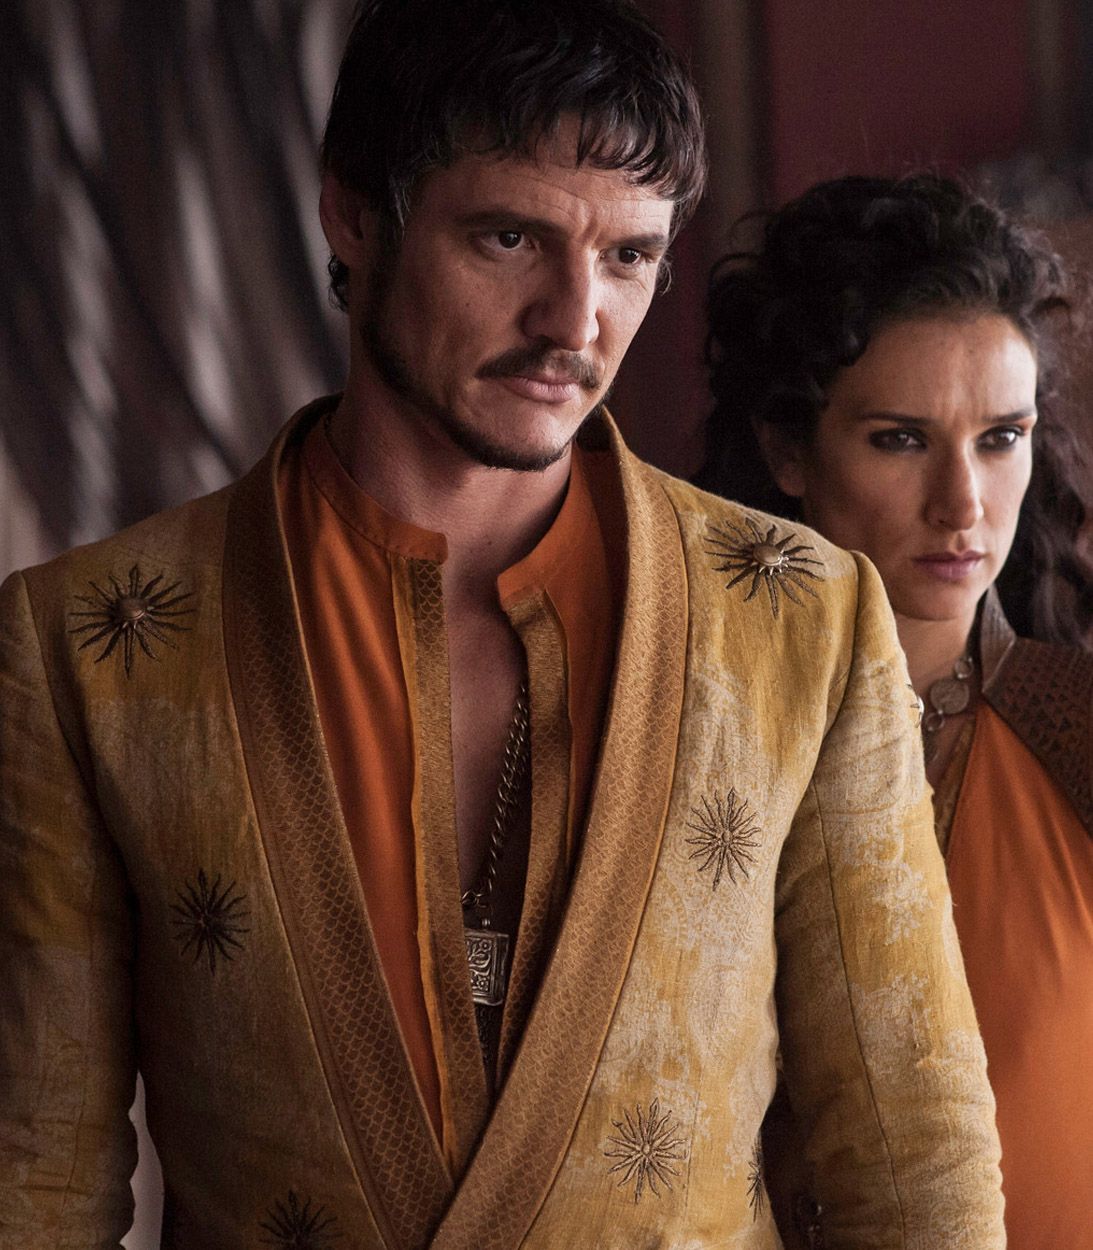 Pedro Pascal as Oberyn Martell in Game of Thrones